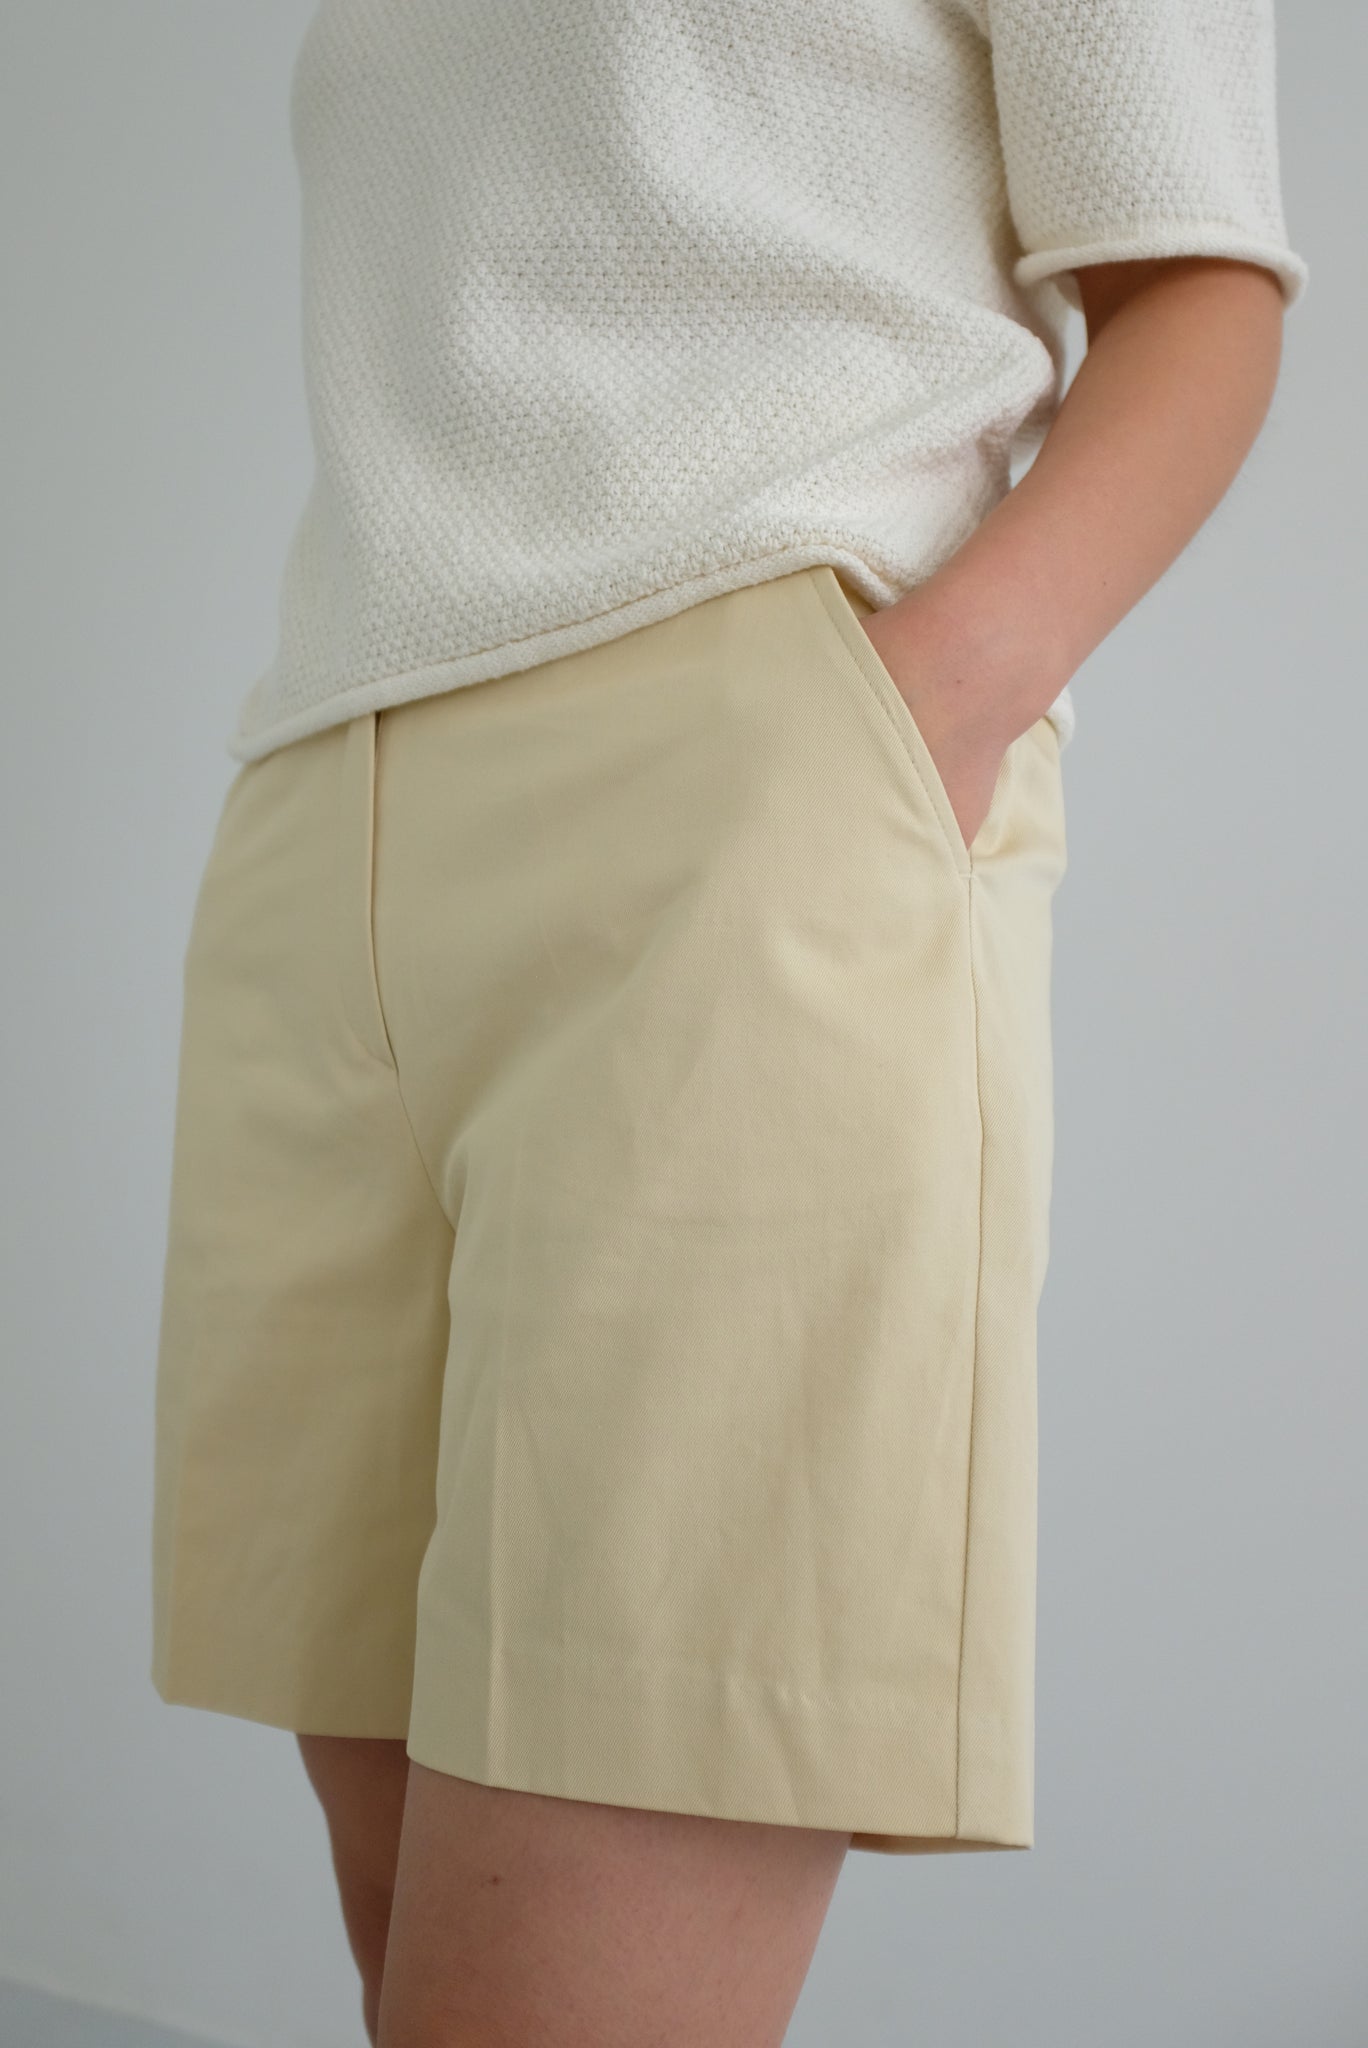 Cotton Shorts in Yellow Butter